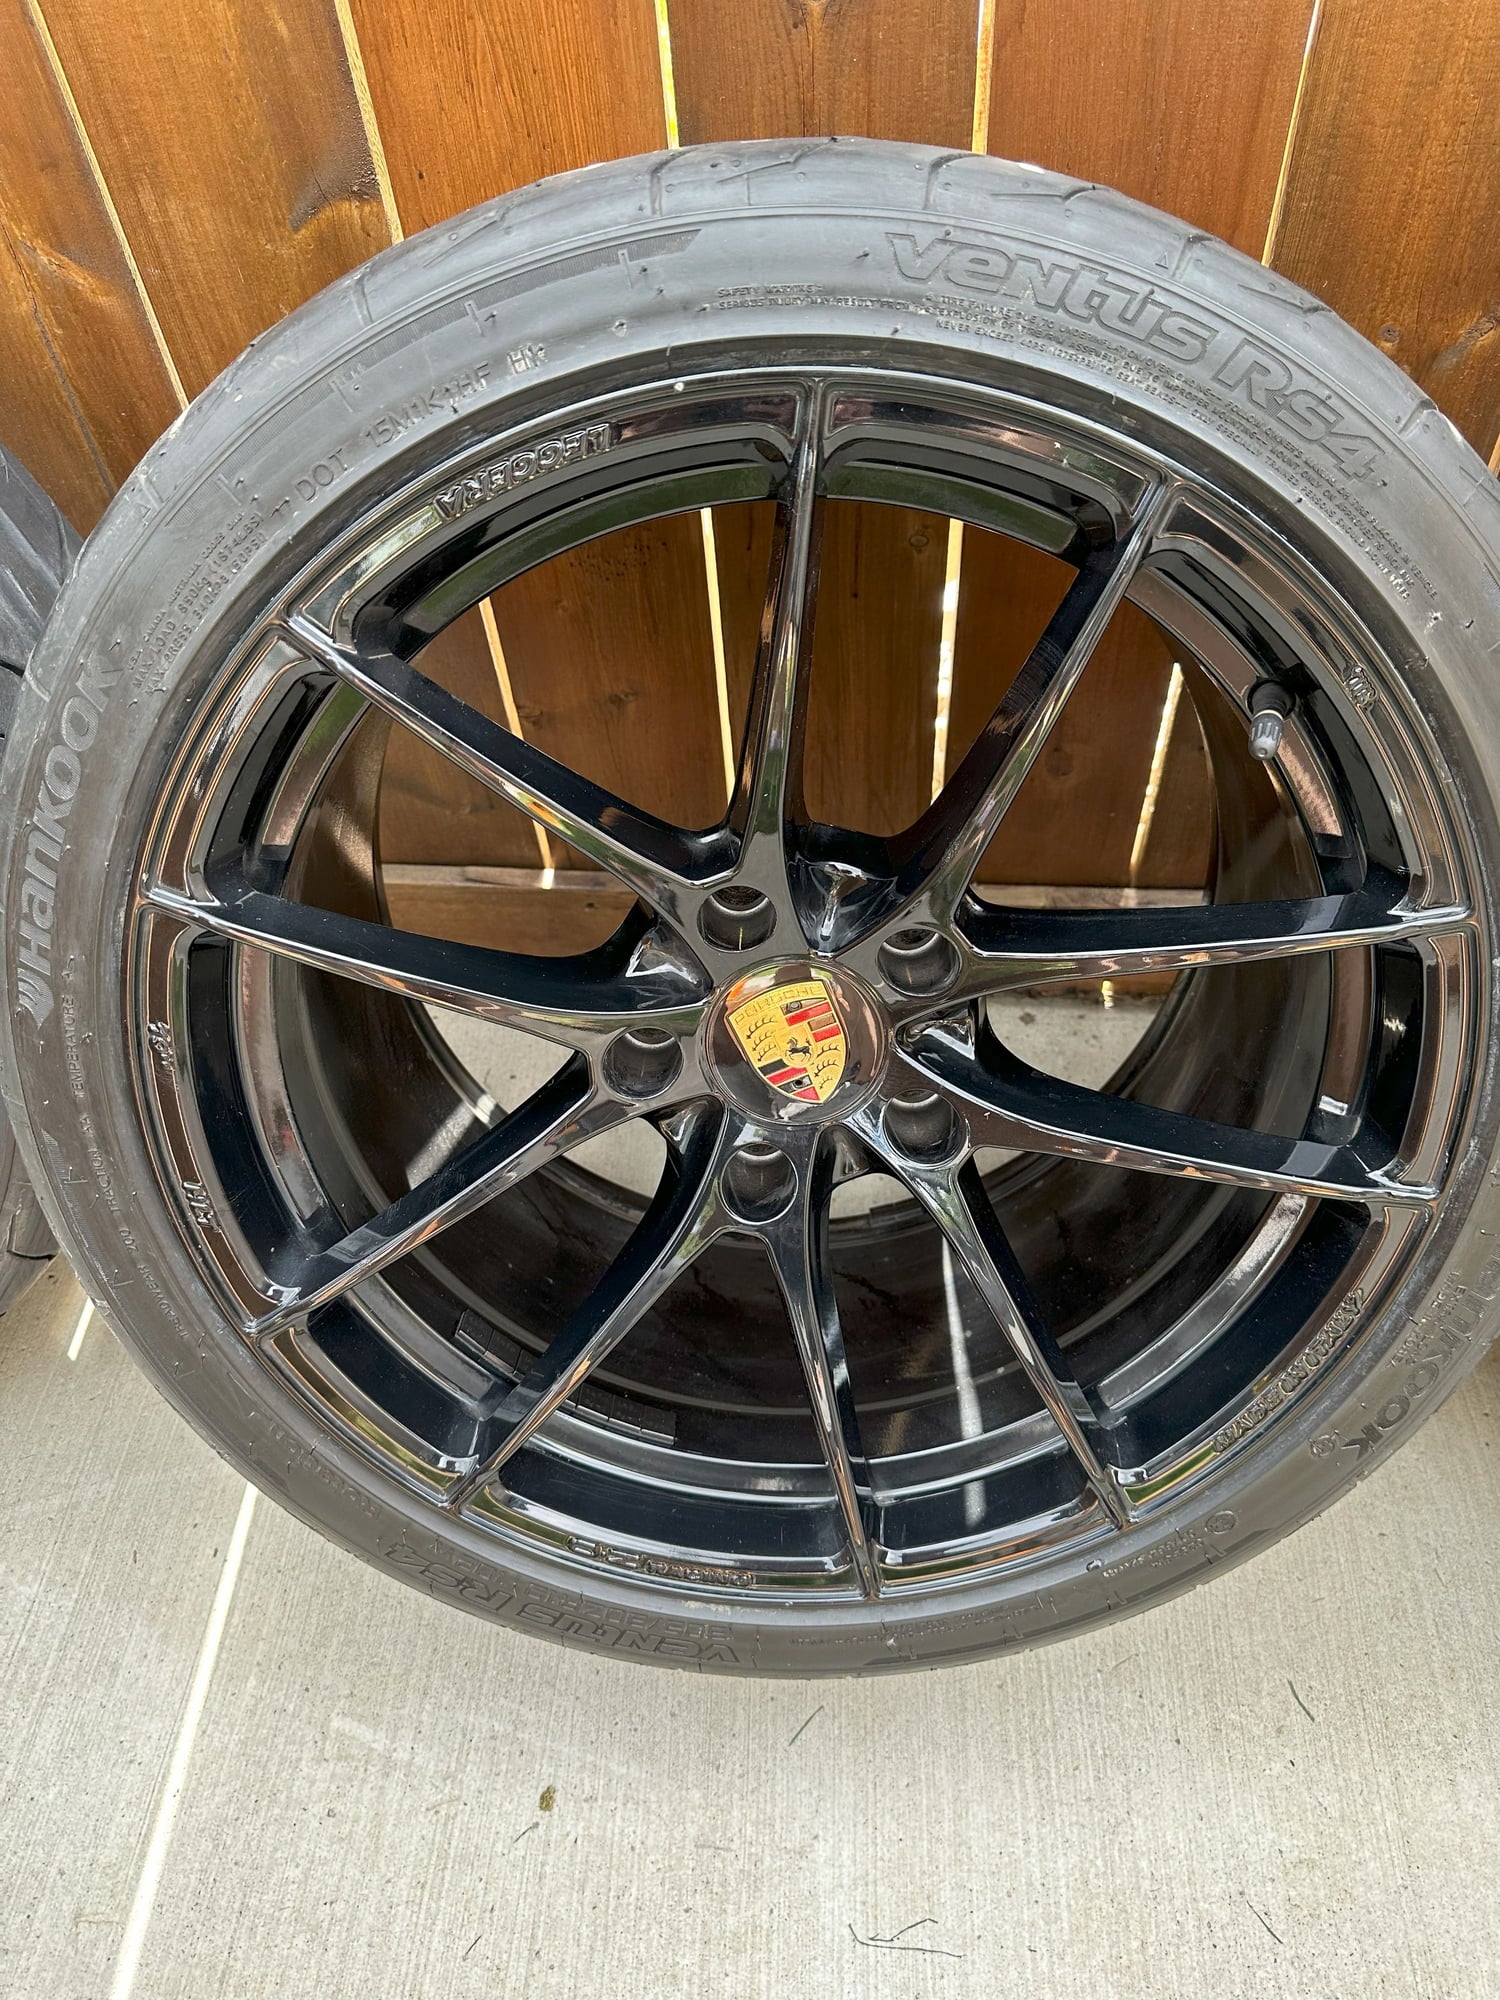 Wheels and Tires/Axles - **MINT** 19" OZ Leggera HLT for Widebody 997 - Used - 2006 to 2012 Porsche 911 - Calgary, AB T2M1Y1, Canada